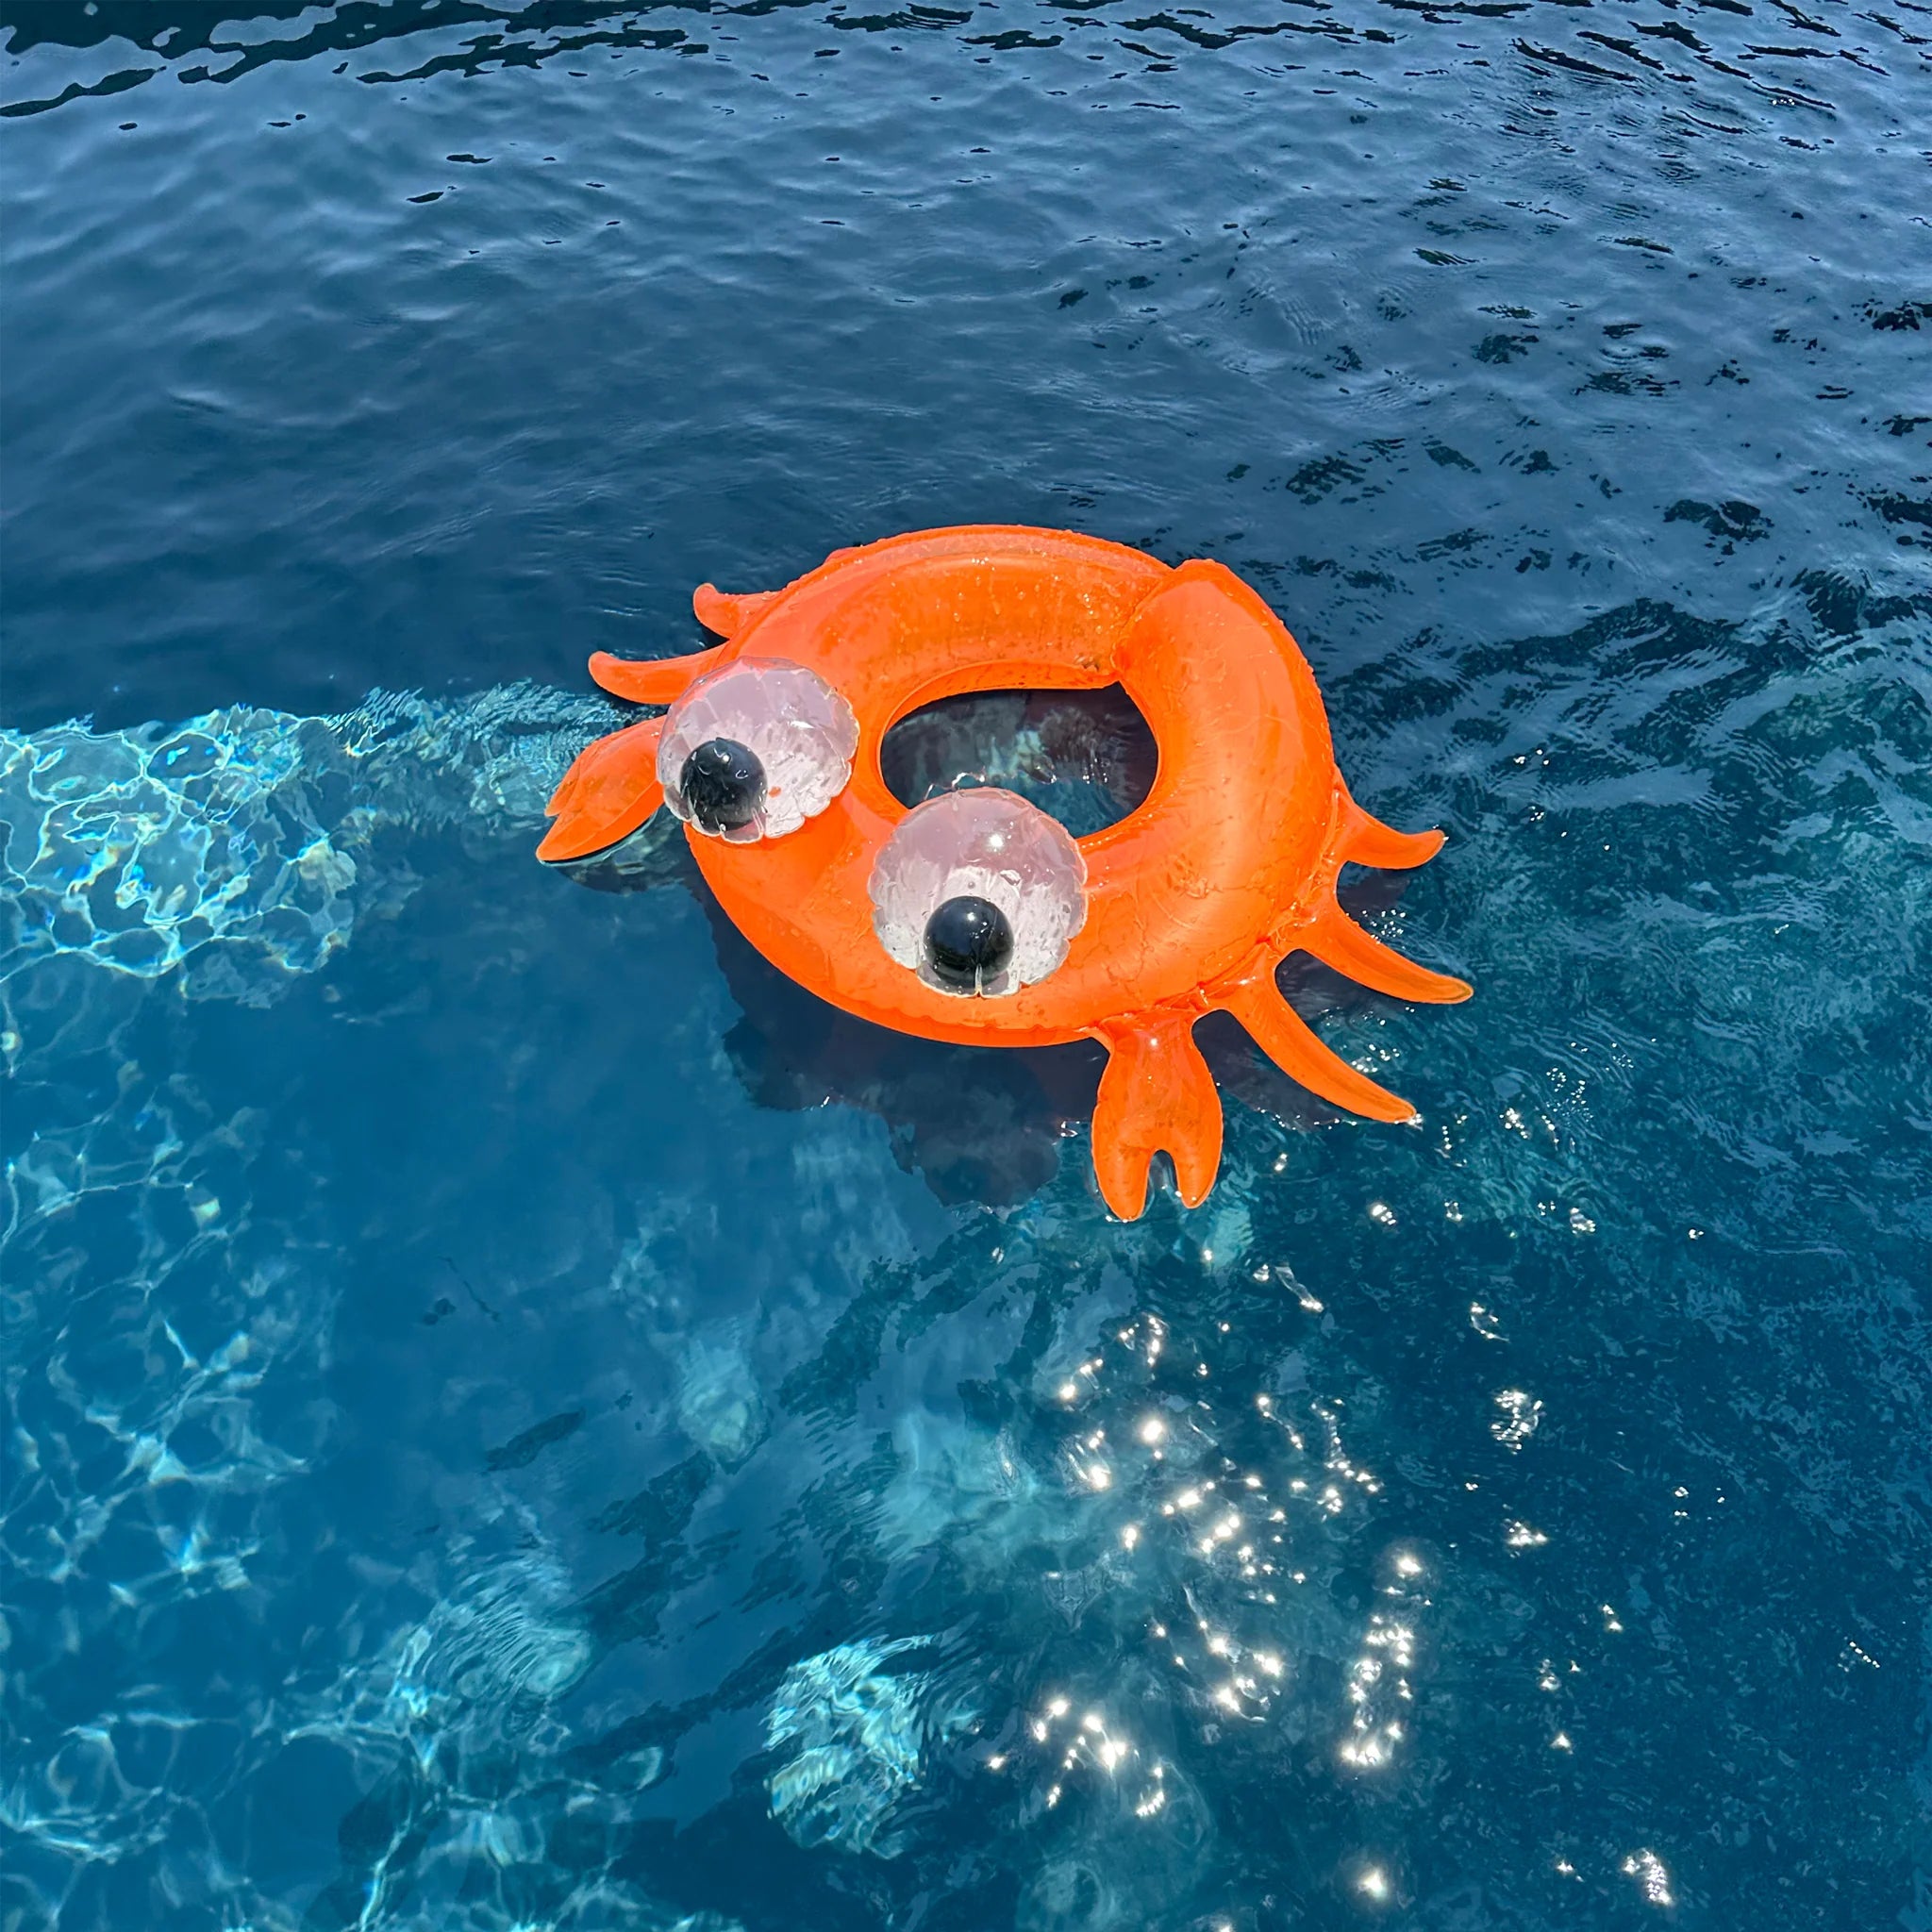 Sunnylife - Sonny The Sea Creature -Kiddy Pool Ring